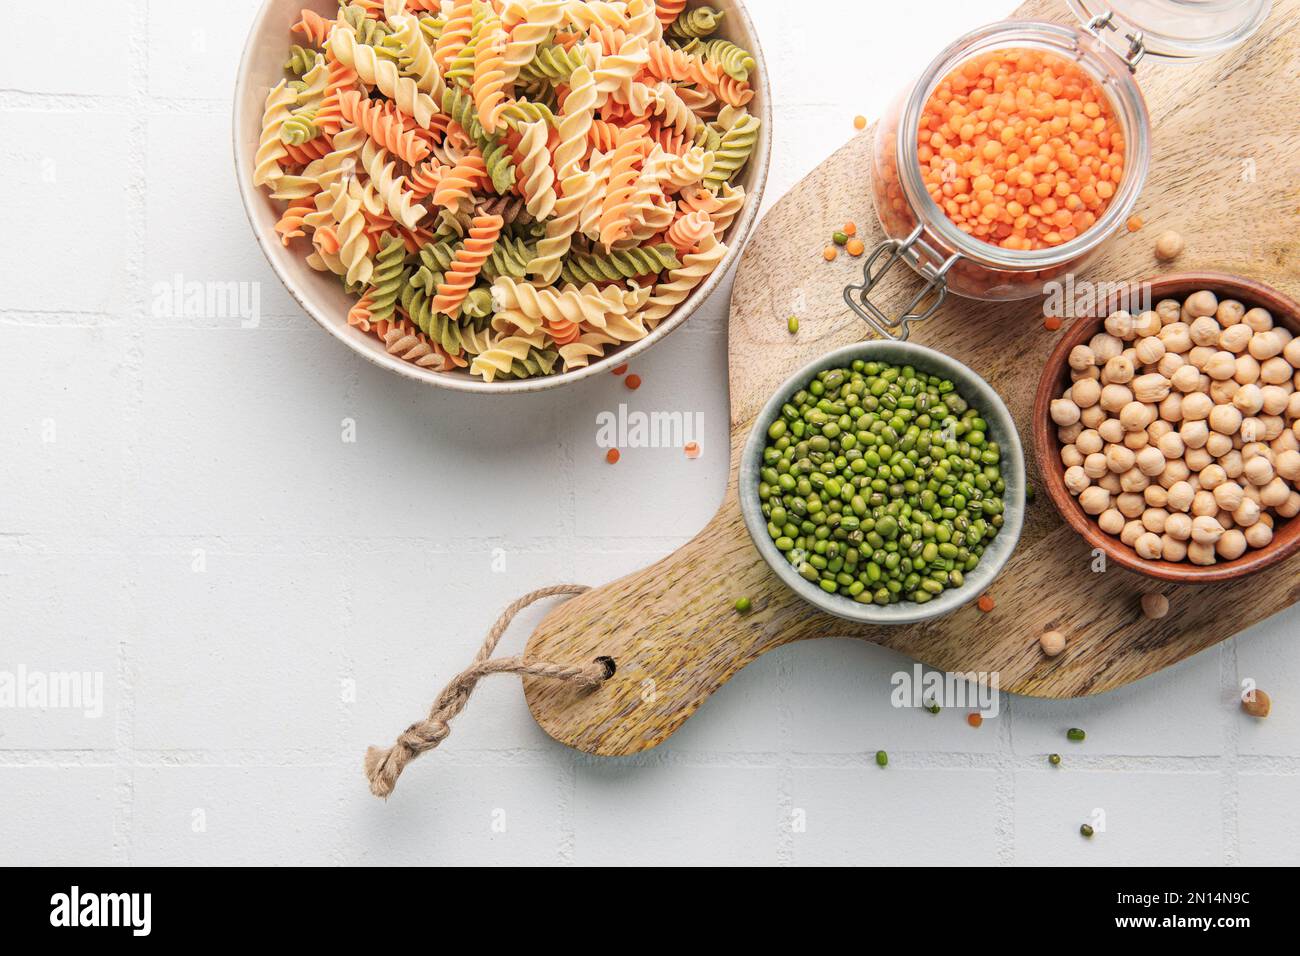 A variety of fusilli pasta made from different types of legumes, green and red lentils, mung beans and chickpeas. Gluten-free pasta. Stock Photo